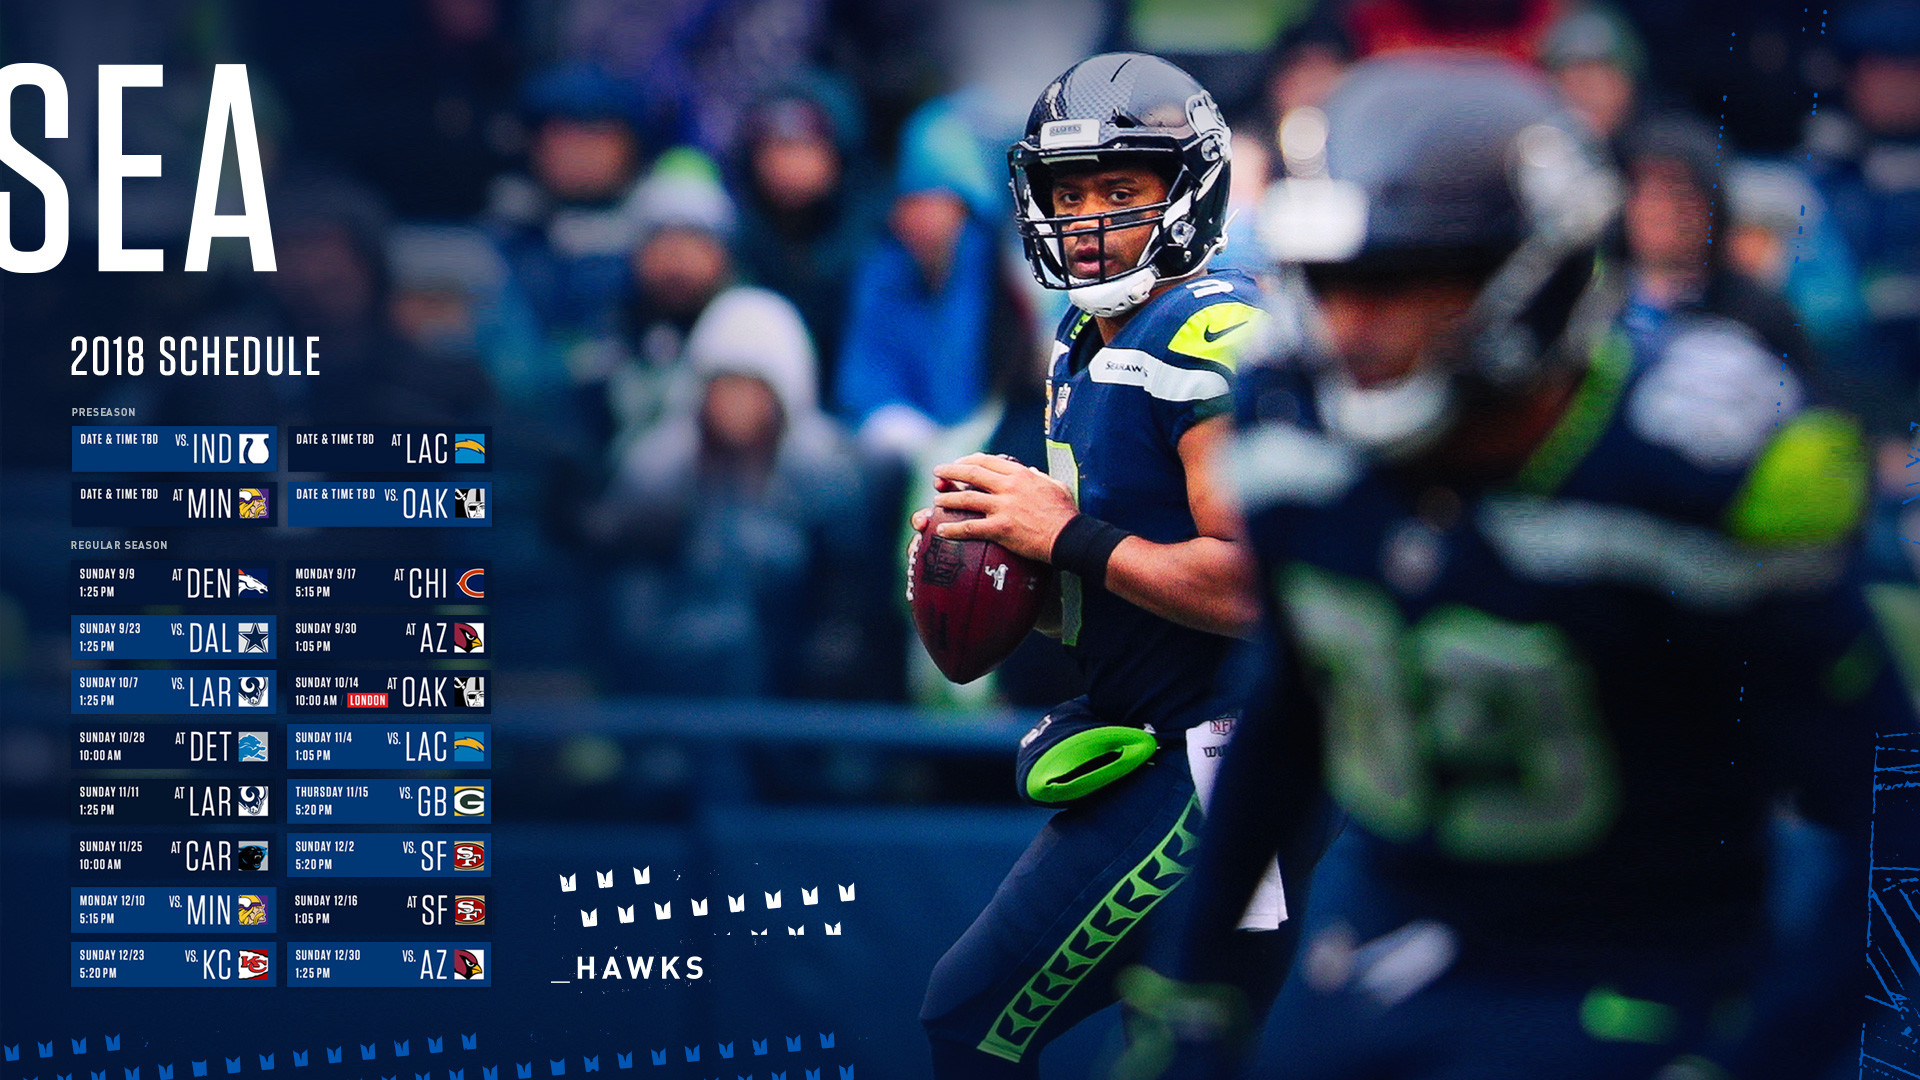 1920x1080 ... Televisions) | 640x1136 (iPod Touch) | 750x1334 (iPhone 6,7,8) |  800x1280 (Other Phones). 2018 Schedule Wallpaper